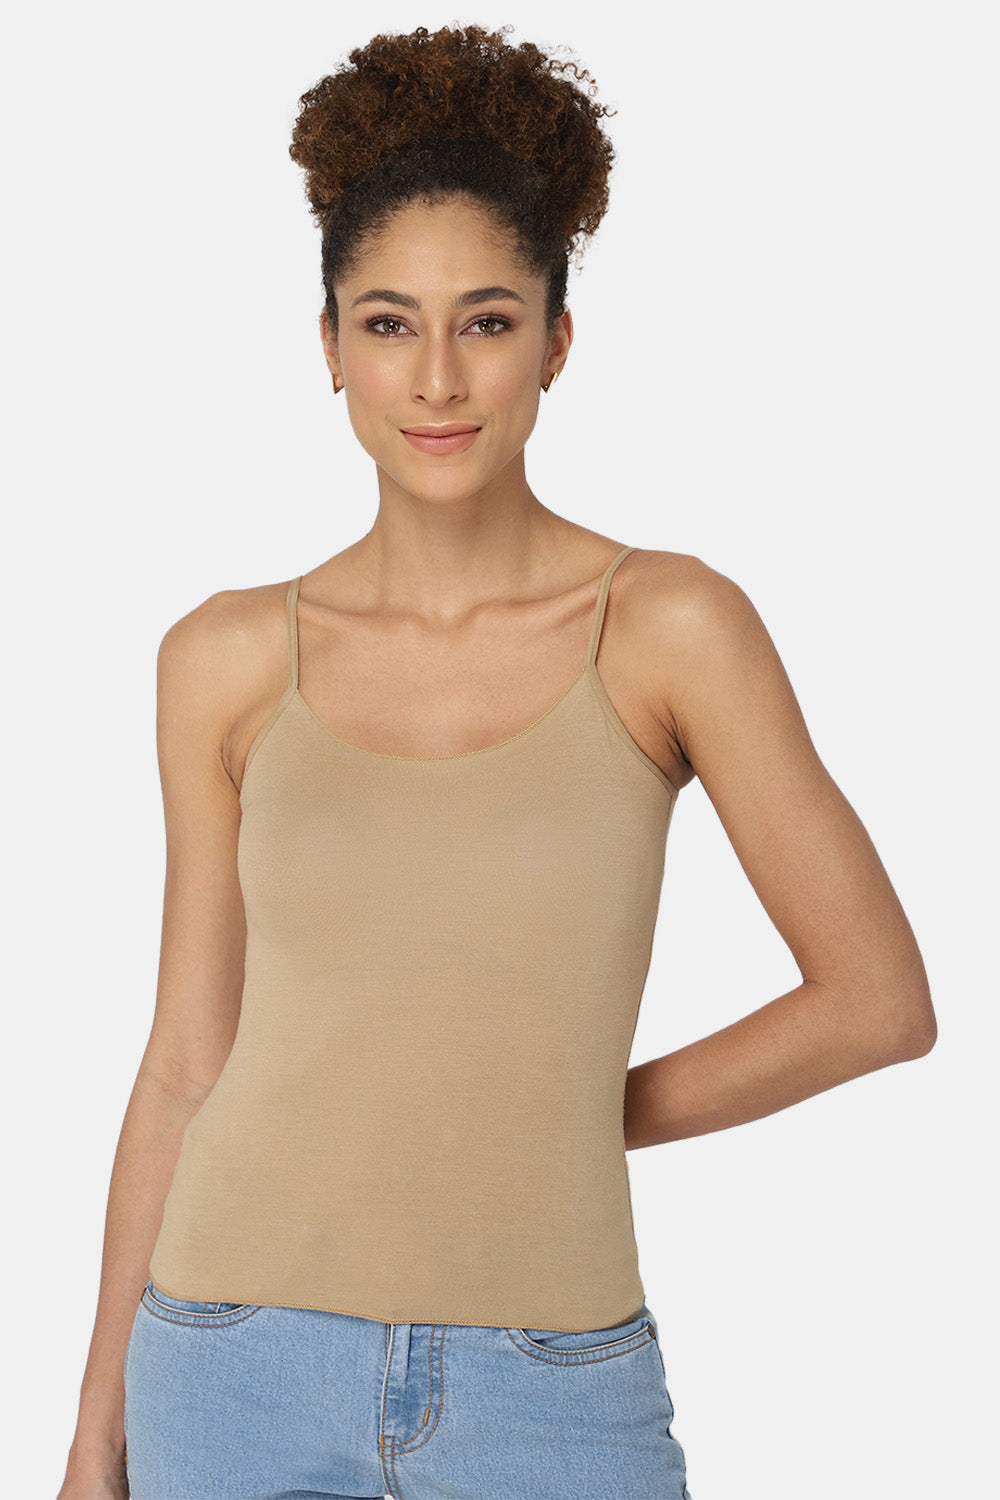 Intimacy Camisole-Slip Special Combo Pack - In08 - Pack of 3 - C52